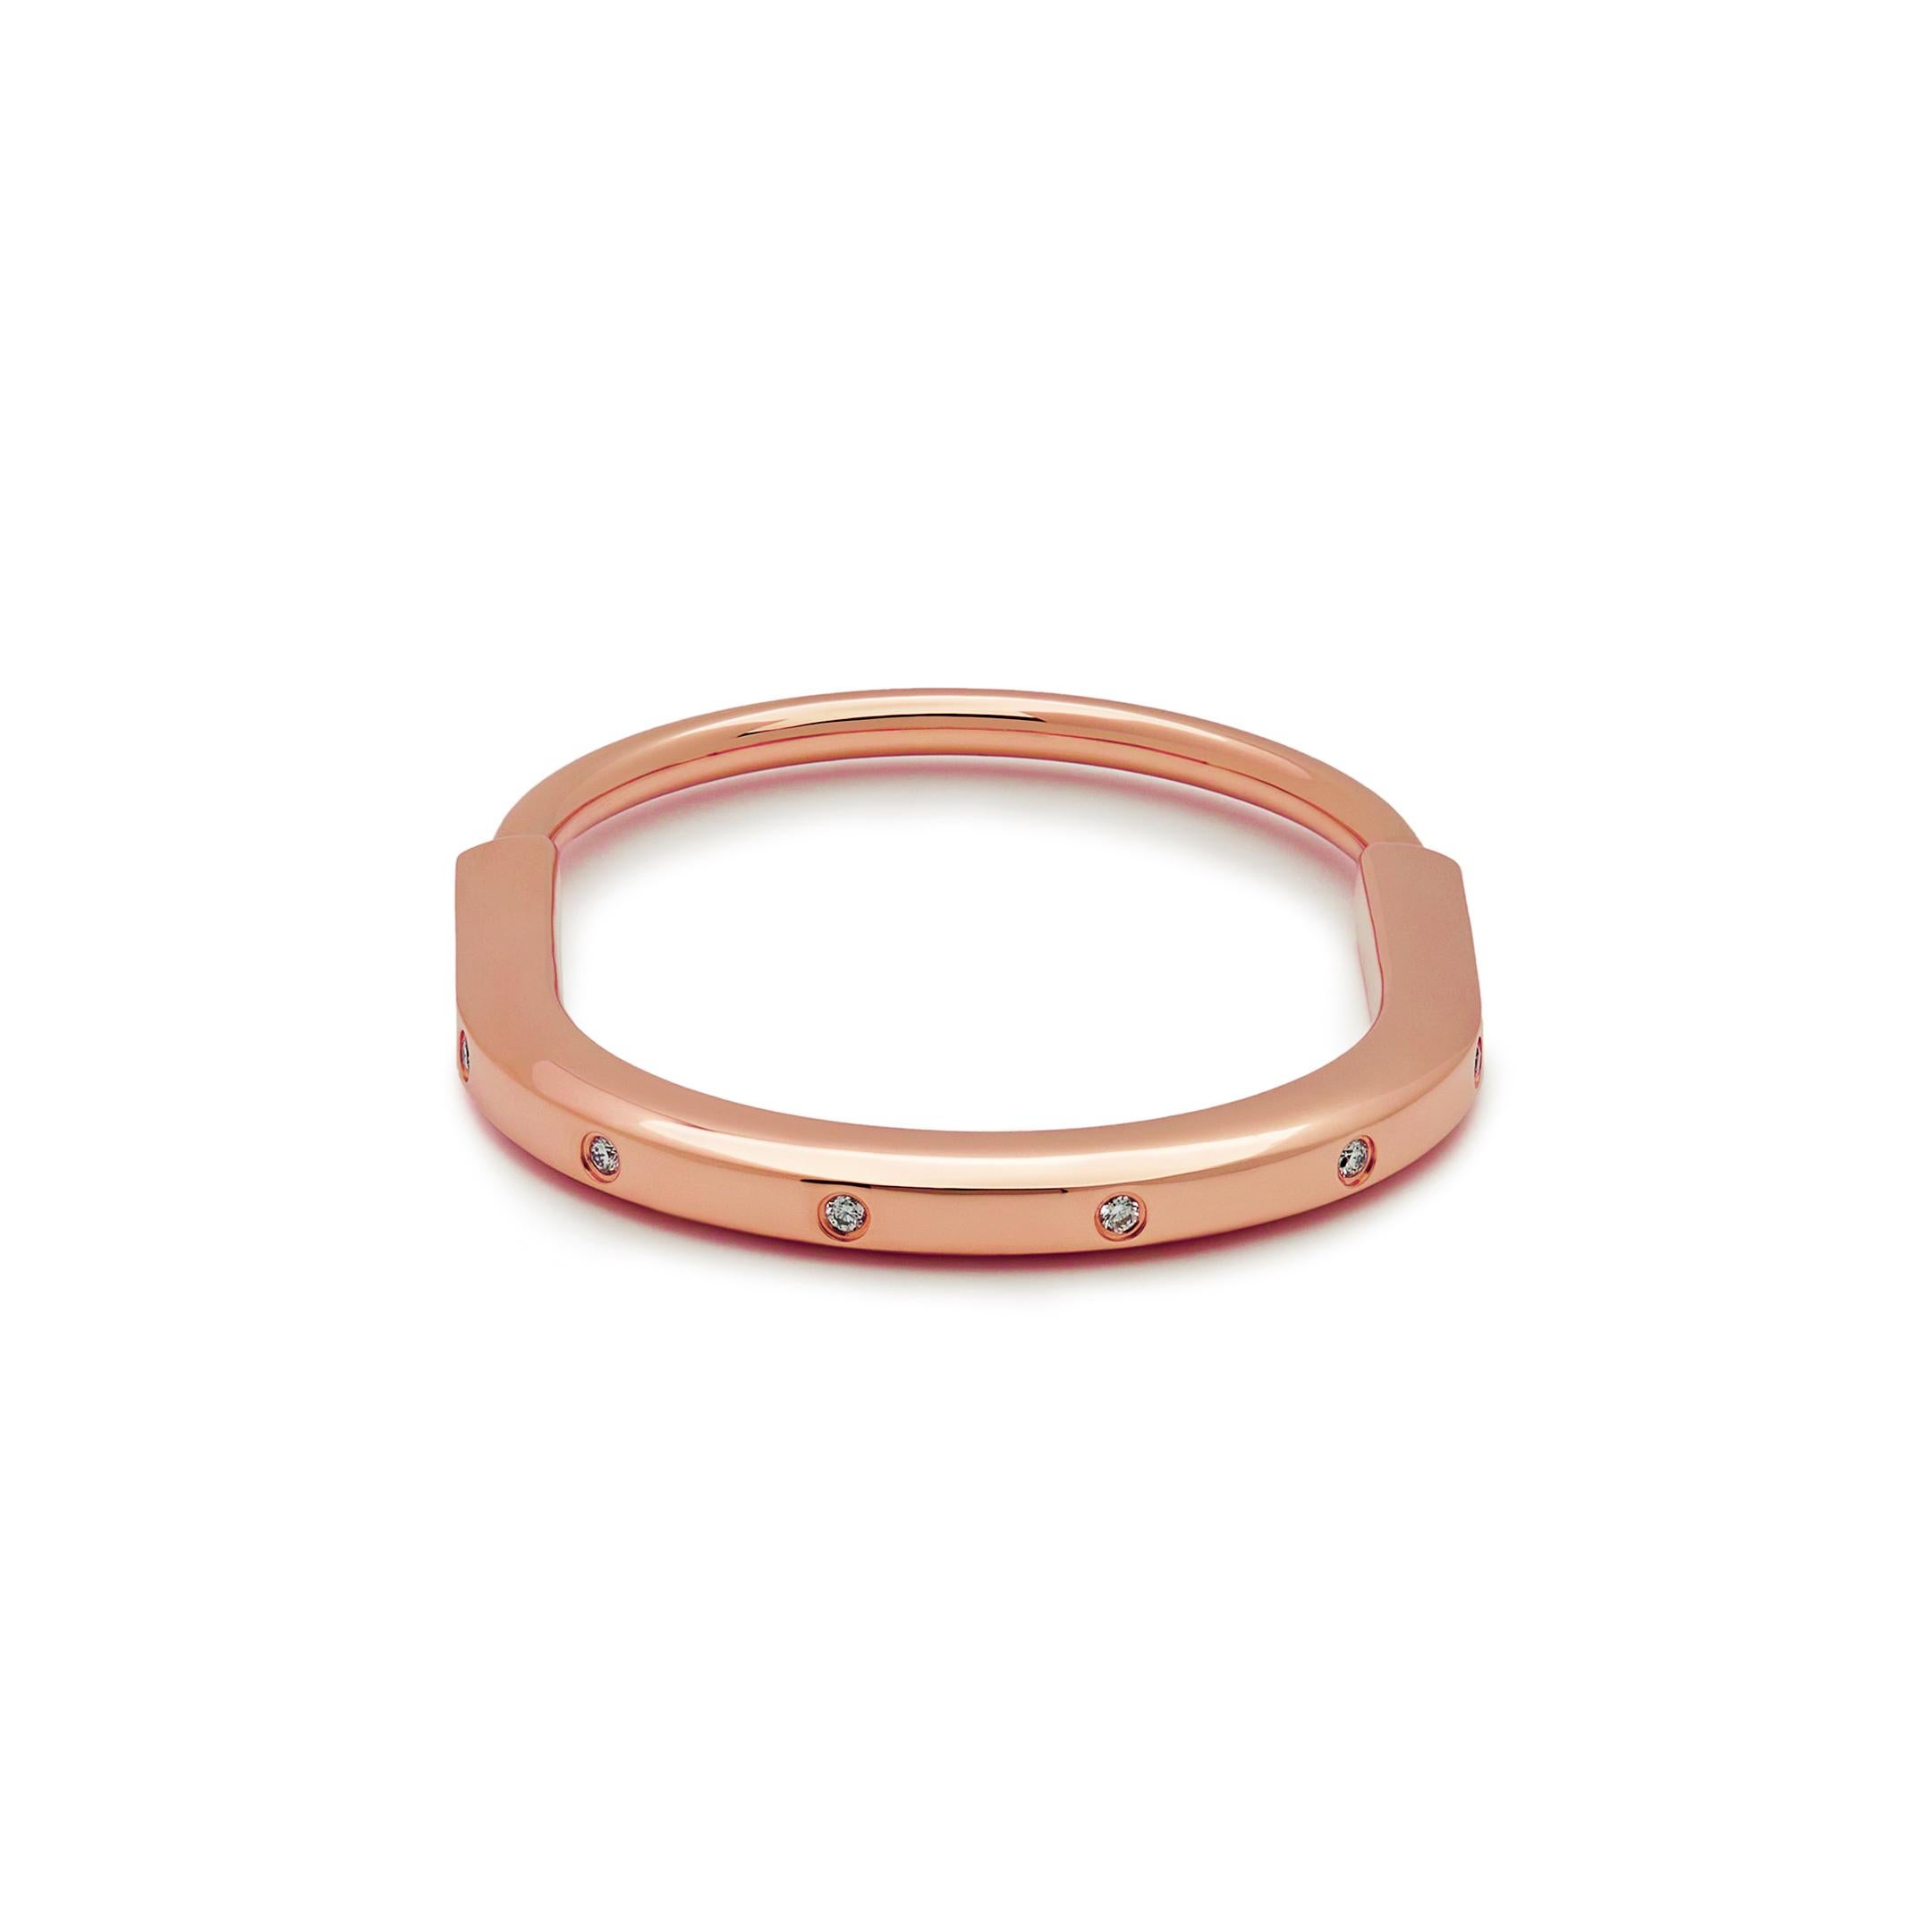 Round Cut Tiffany & Co. Lock Bangle in Rose Gold with Diamond Accents 70185296 For Sale